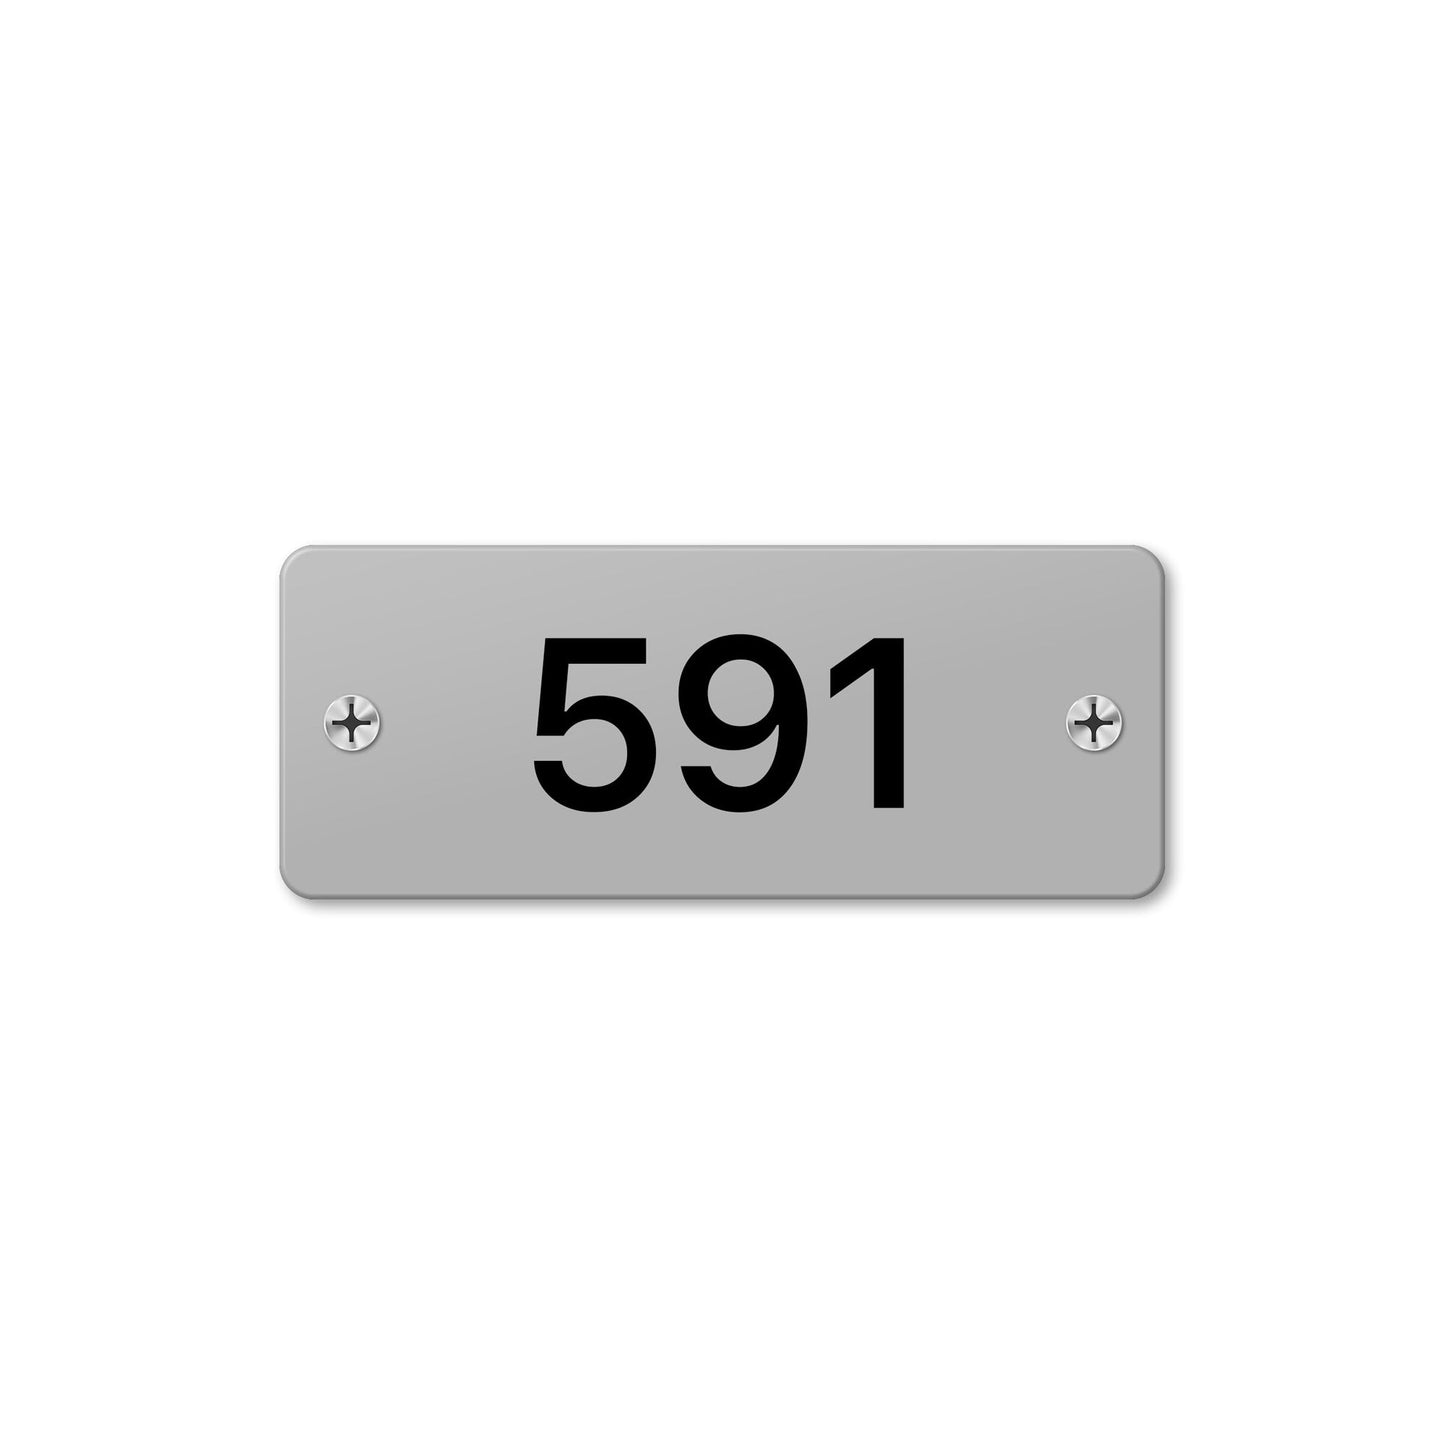 Numeral 591